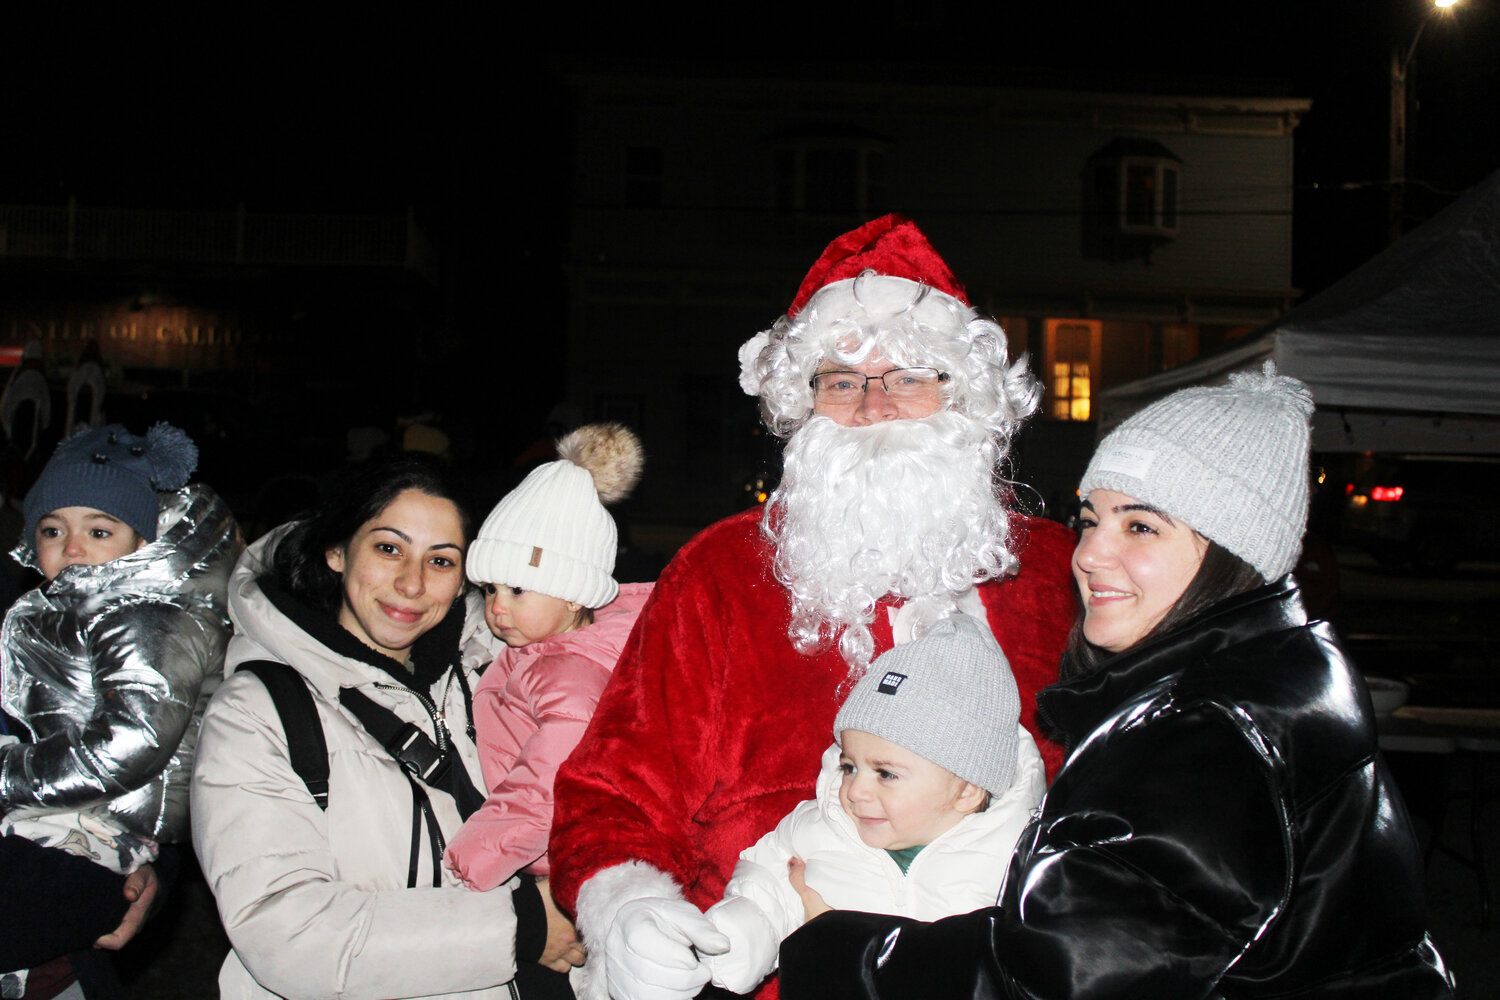 Jolly Old St. Nicholas posed for pictures with families and kids of all ages as he made his expected visit to the 8th Annual Callicoon Tree Lighting on Saturday, November 25!